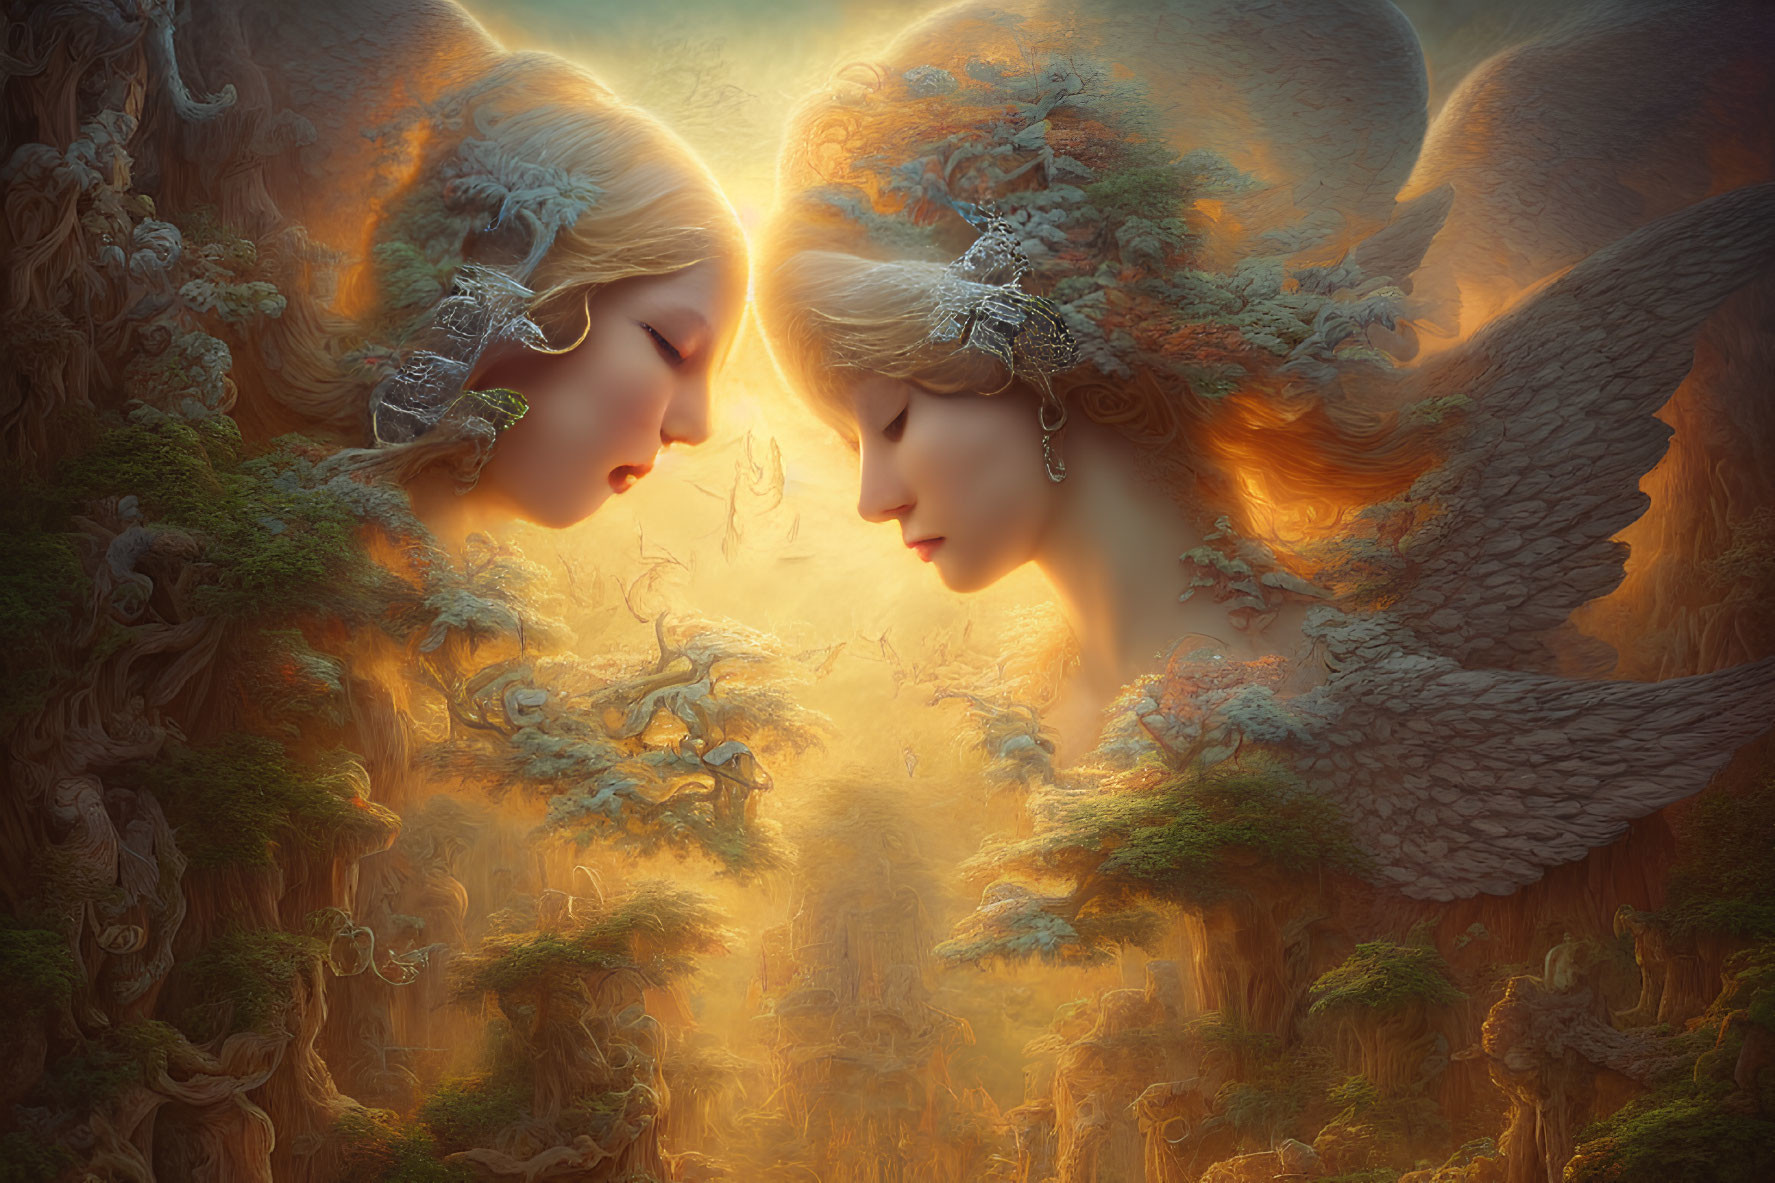 Ethereal beings with ornate headdresses and wings in mystical forest